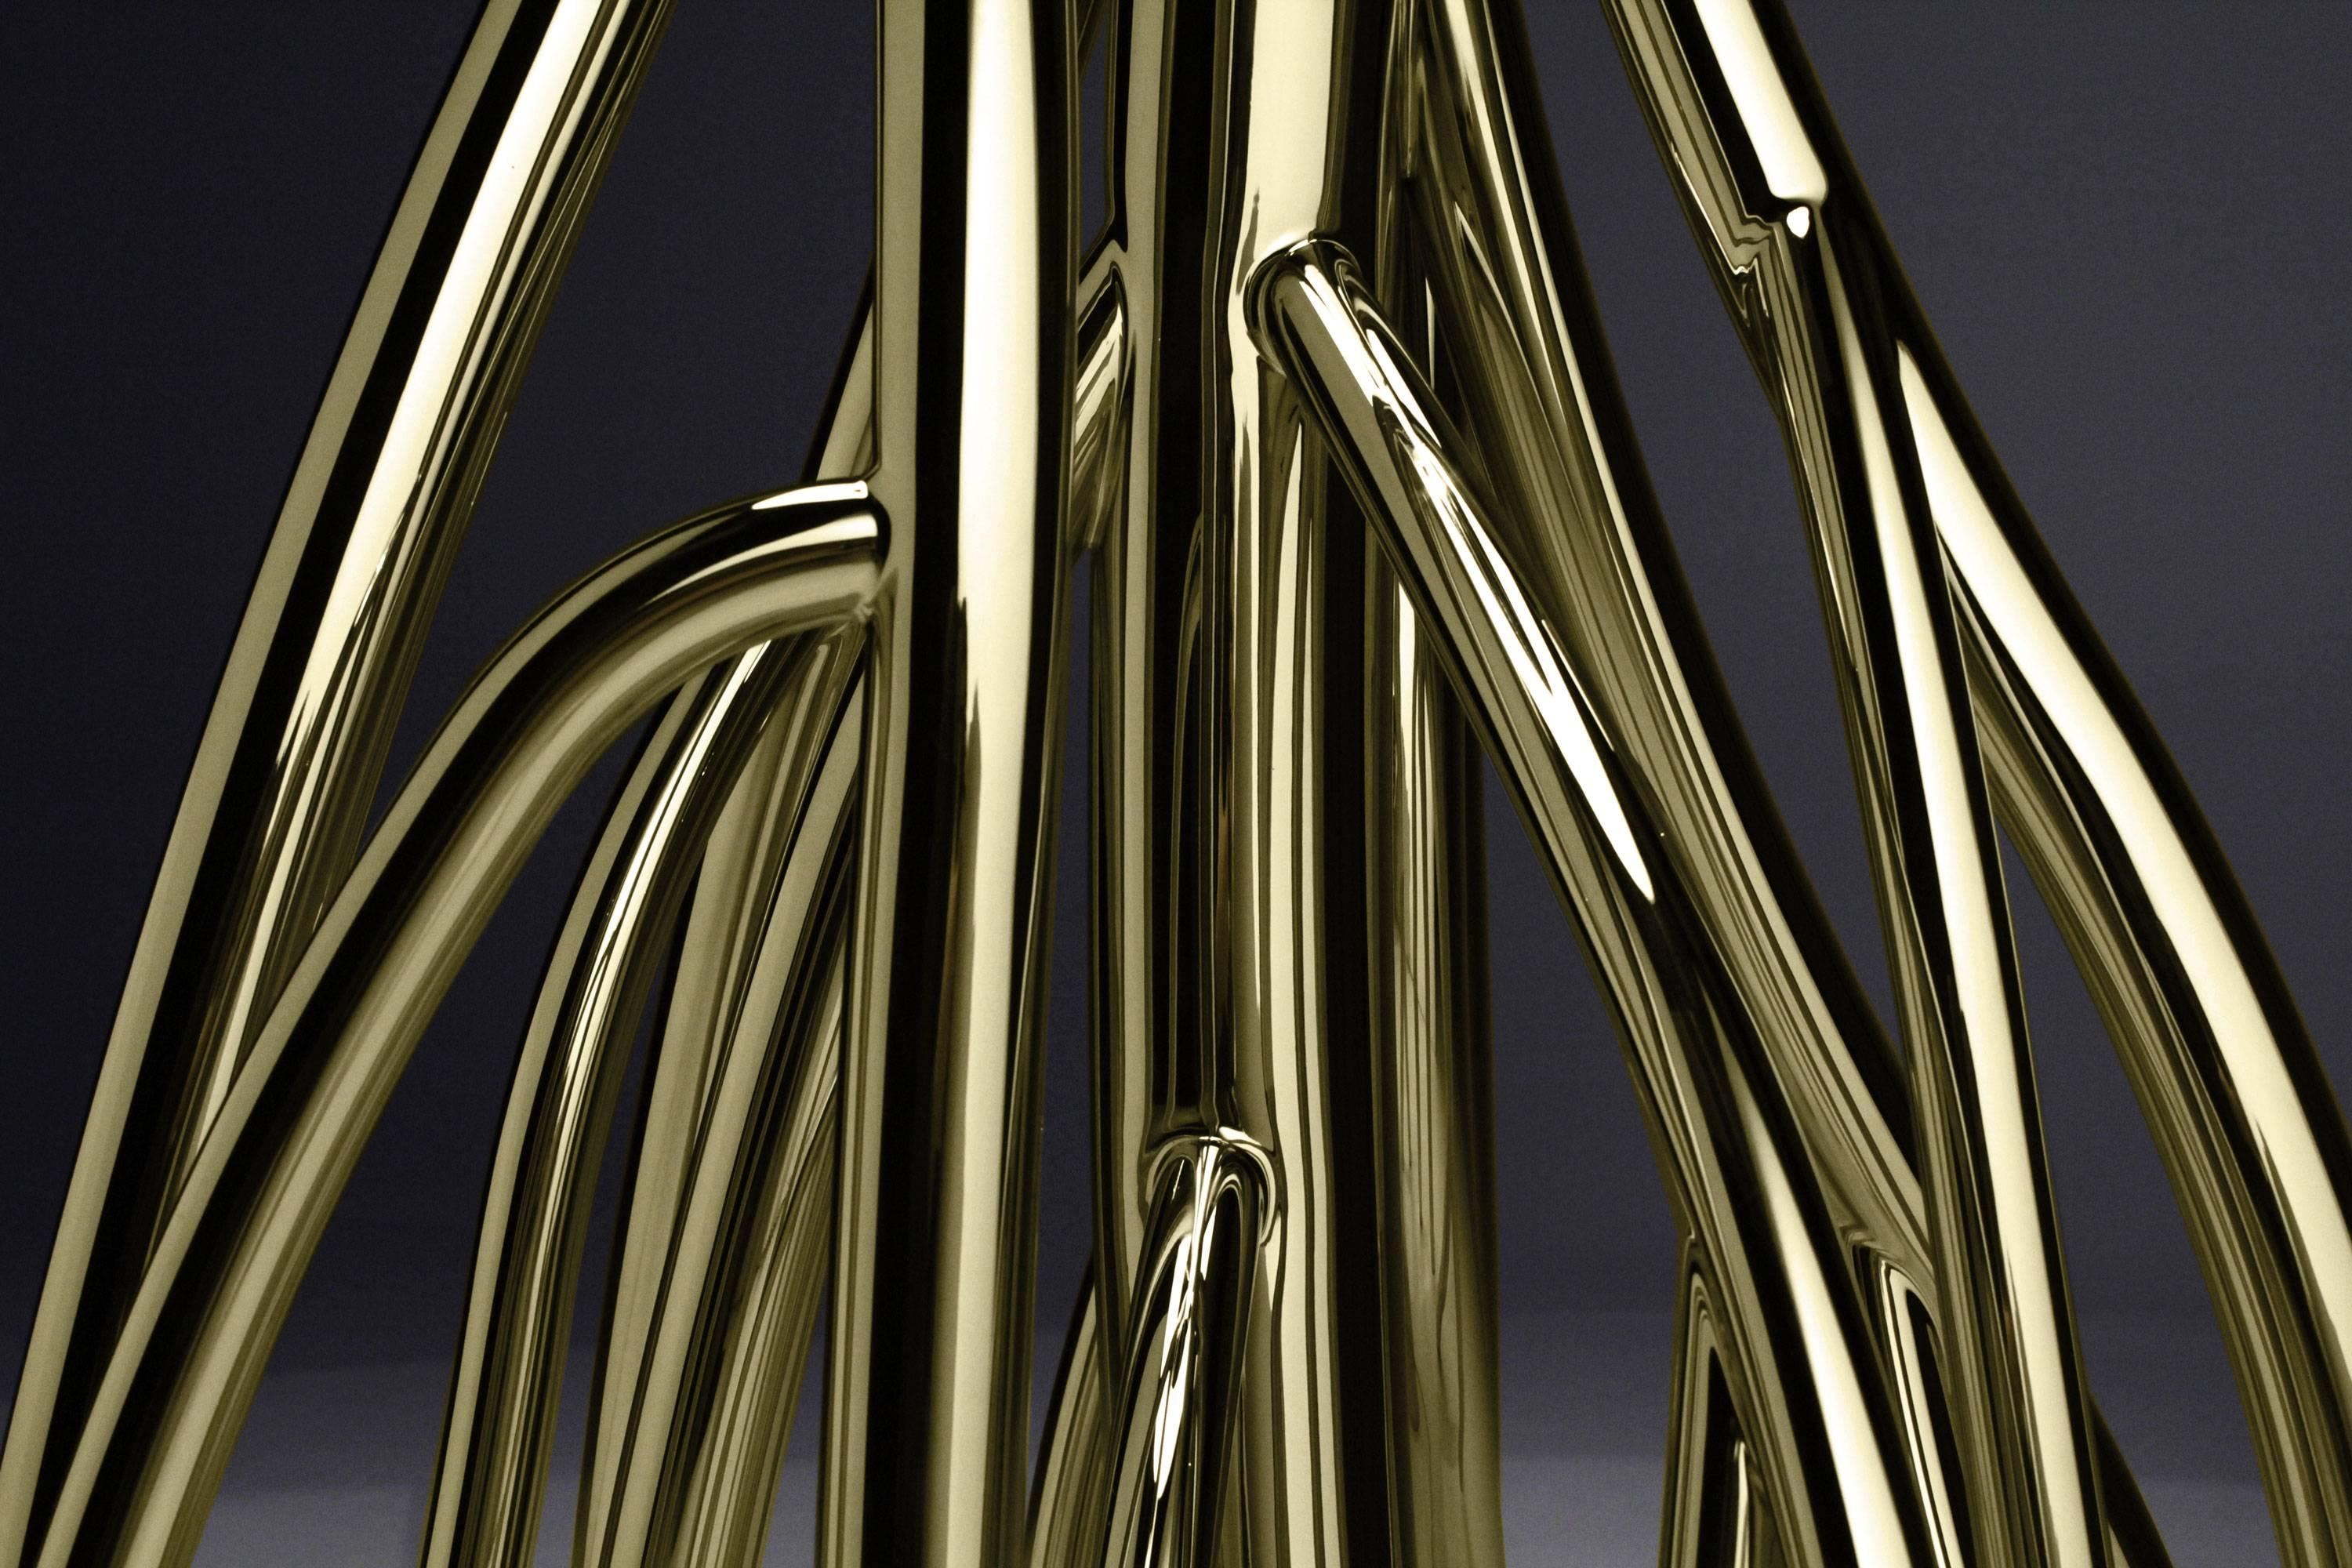 The structure, the “roots”, of the floor lamp Mangrovia 'Em Flor' are made of mirror polished stainless steel, colored golden via a particular procedure. The floor lamp is composed of tubes of various diameters, the lampshade is made of golden